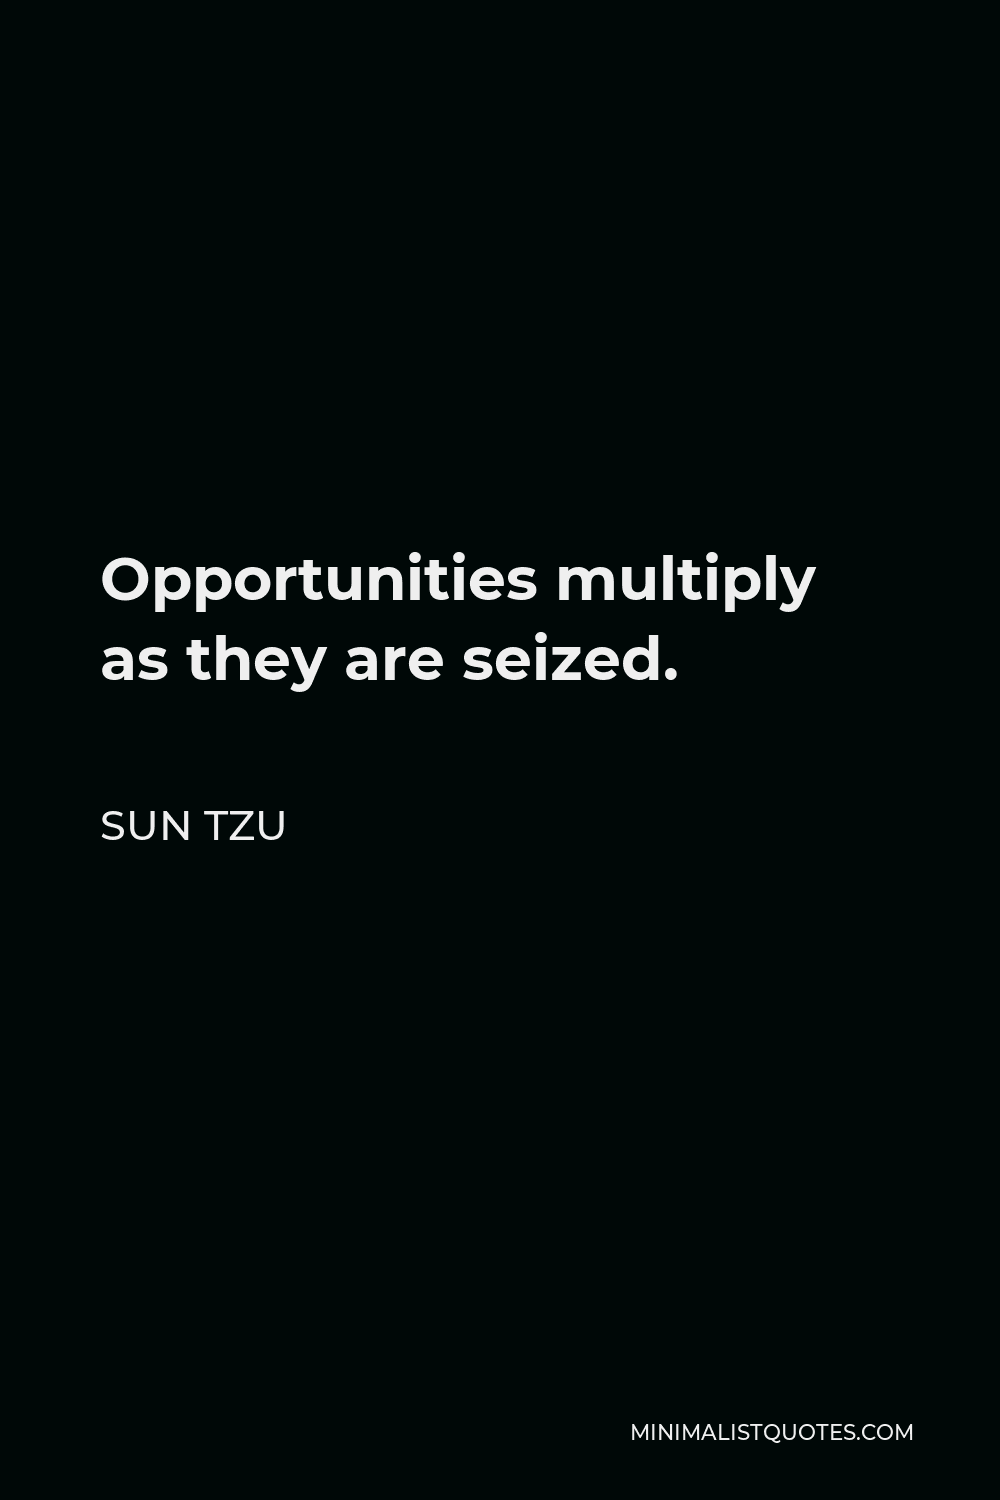 Sun Tzu Quote: Opportunities multiply as they are seized.